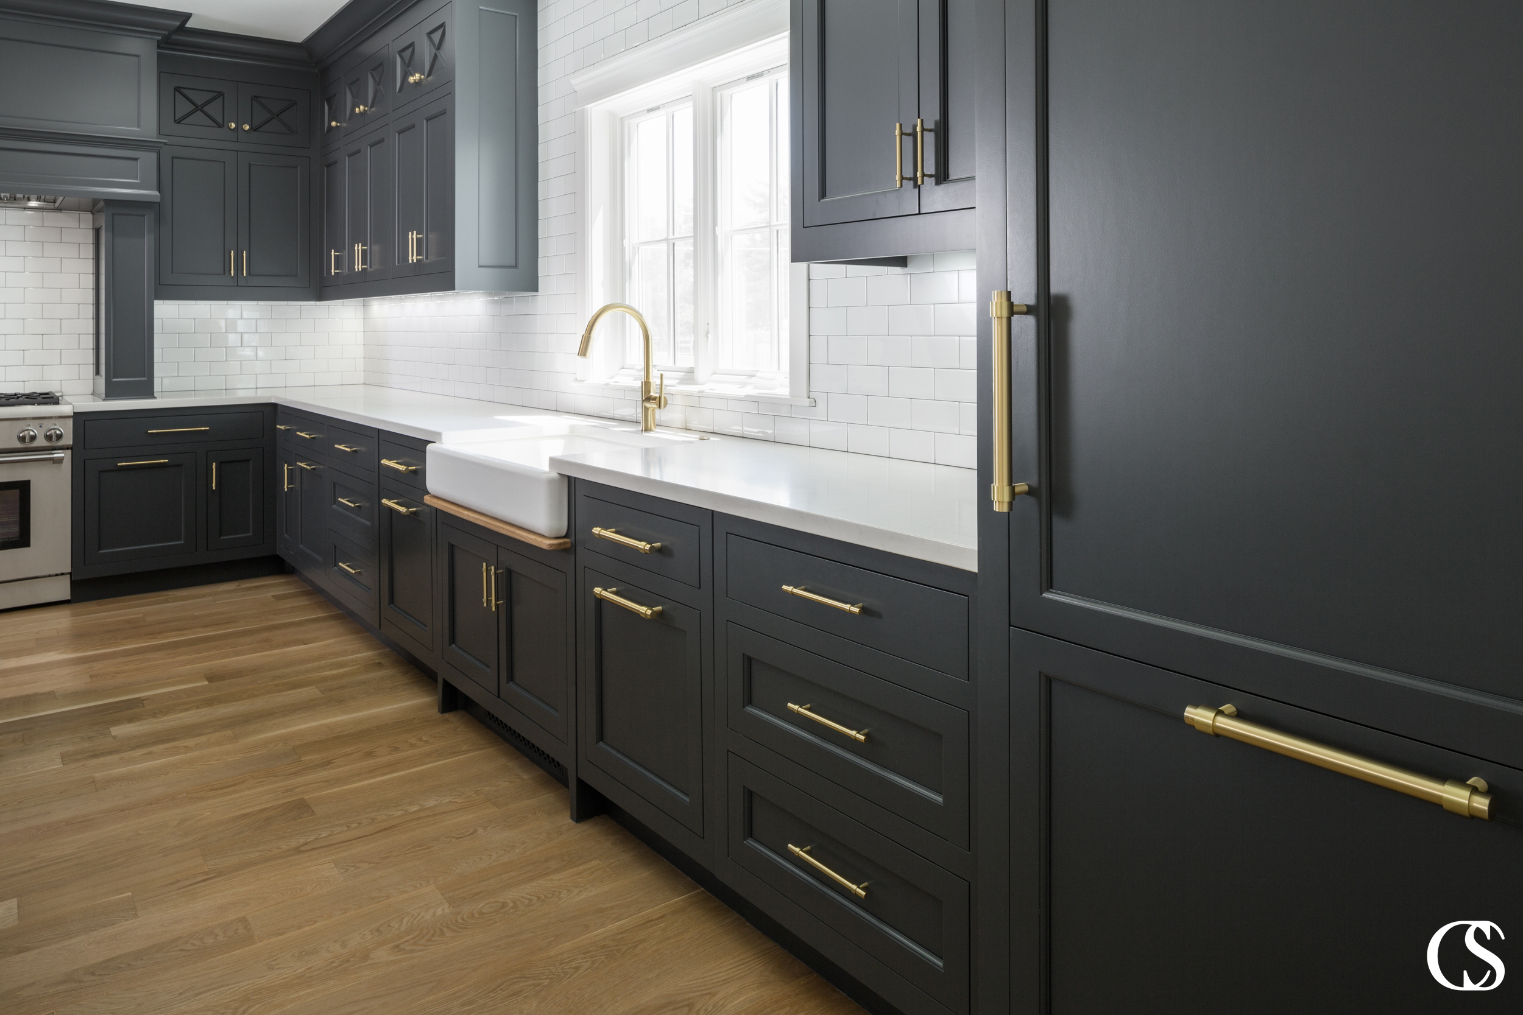 TIMBER COLLECTION, kitchen handles, cabinet handles